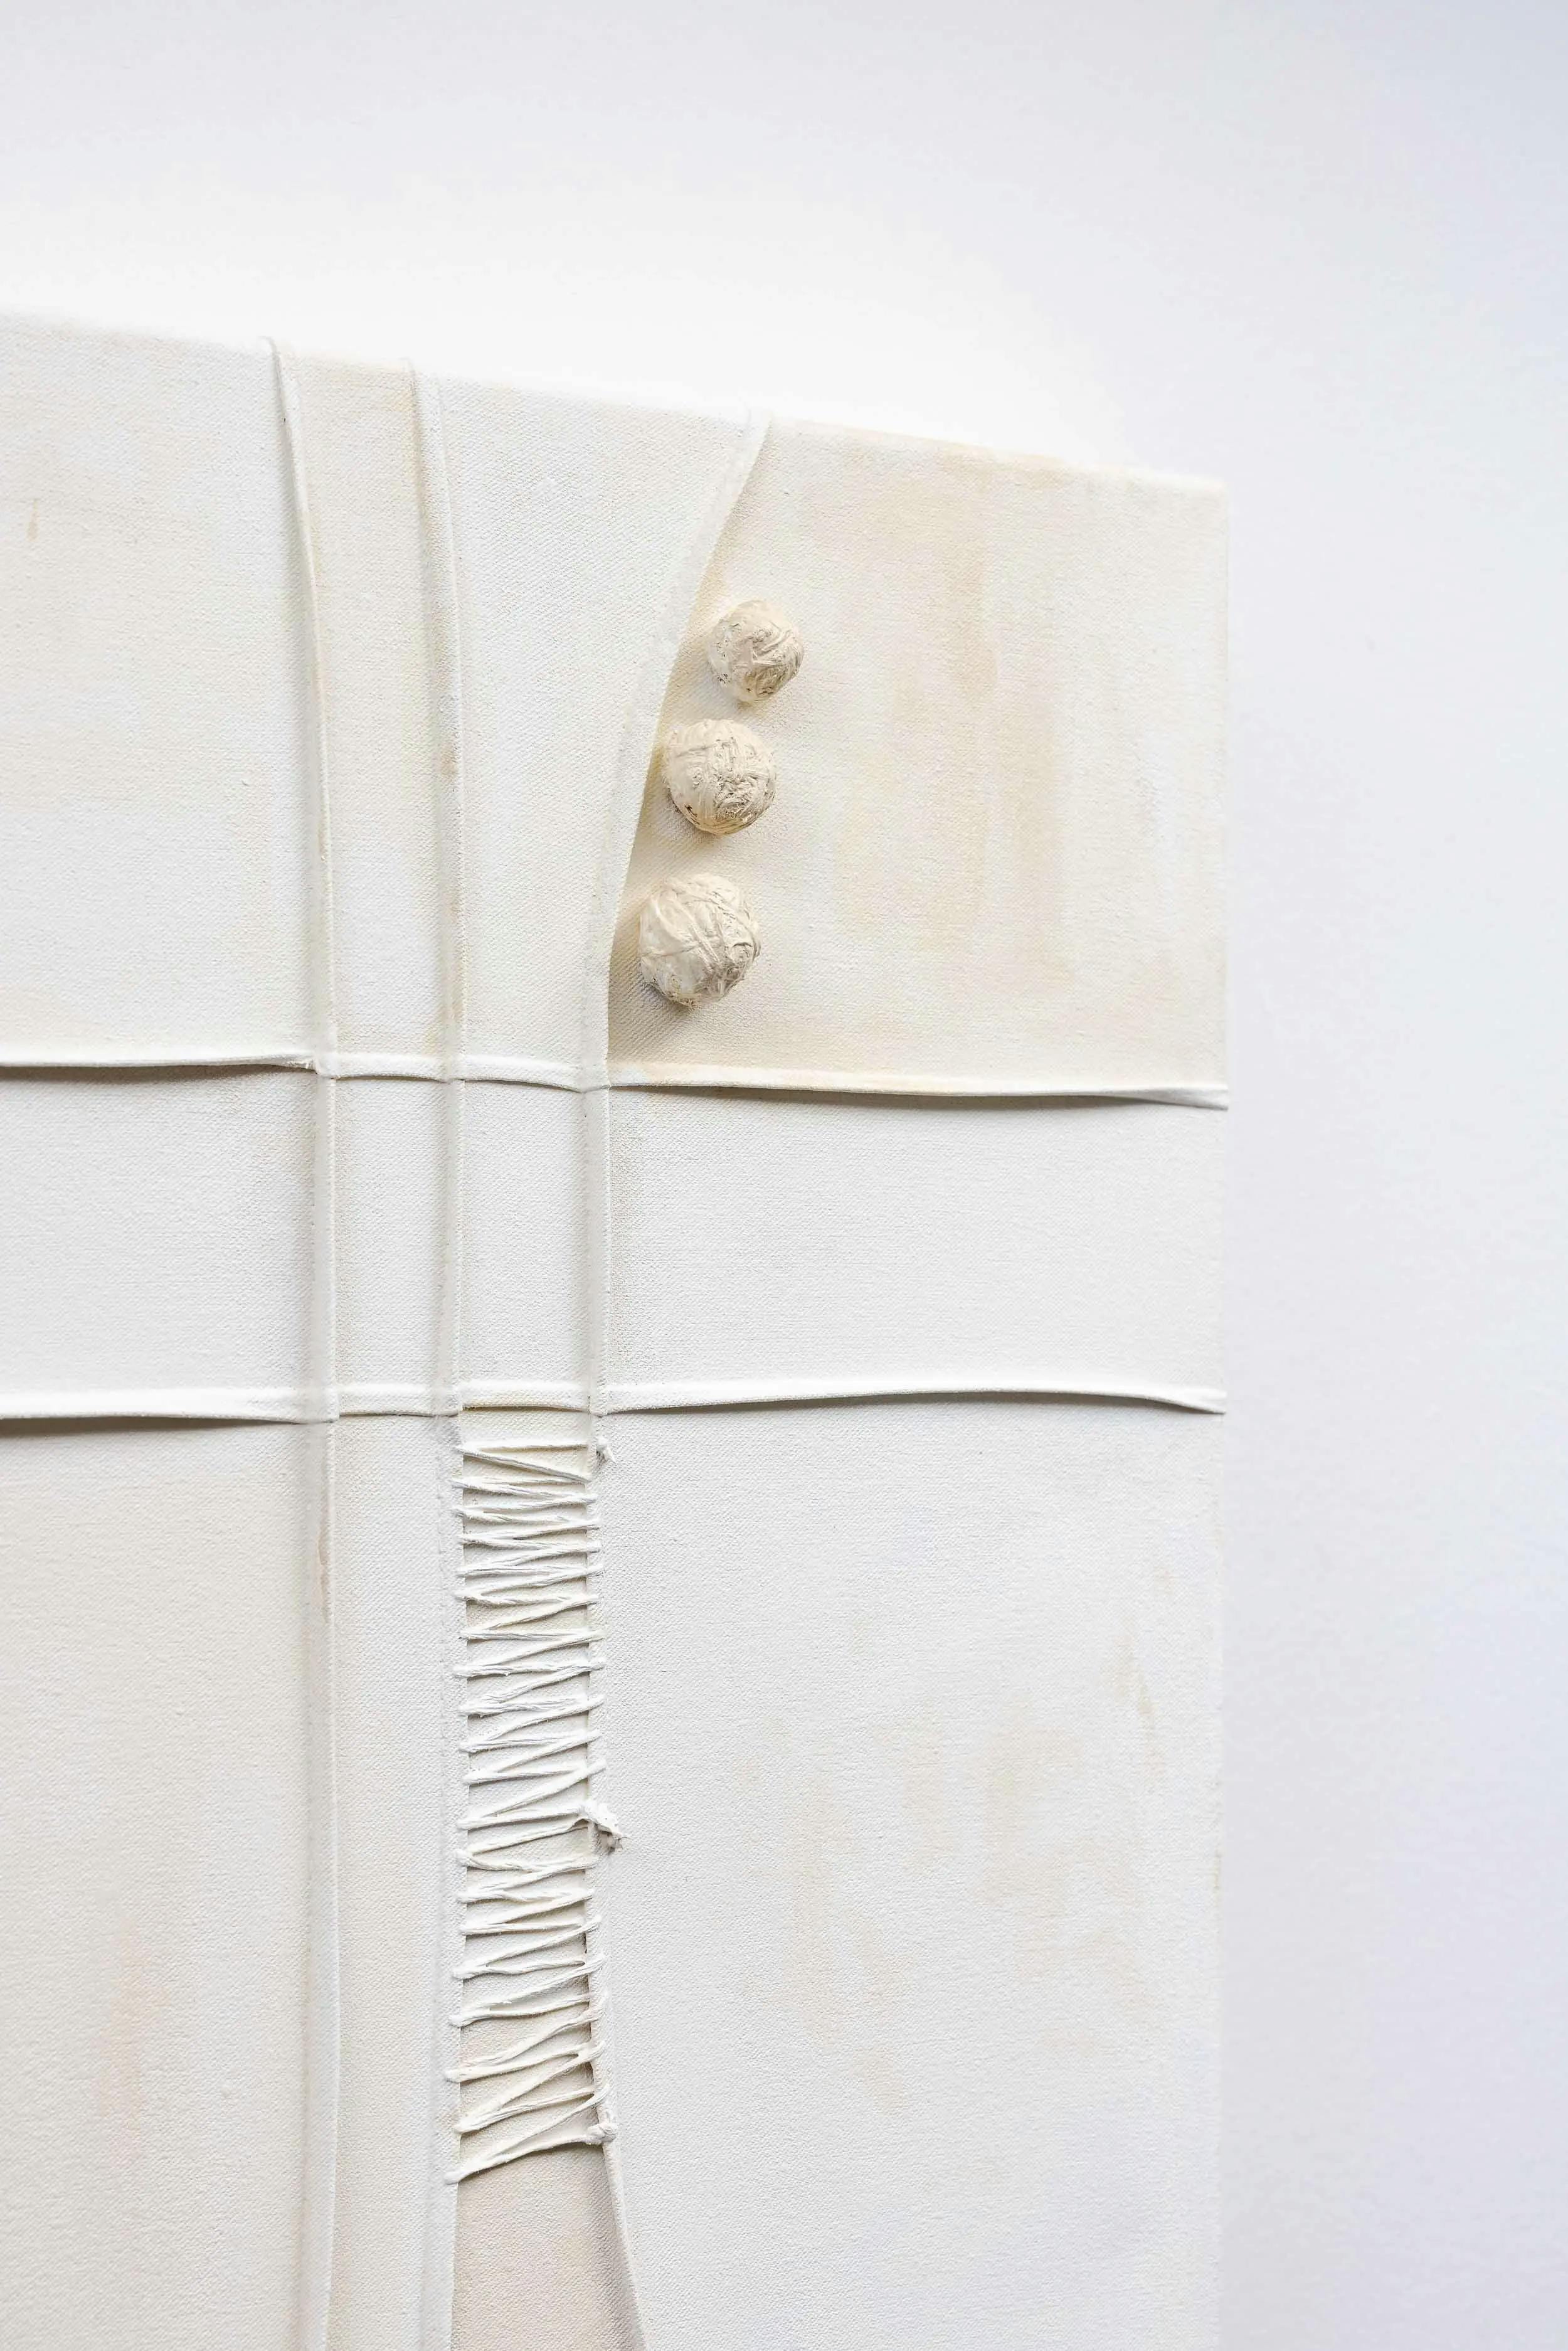 A close up of a hand-stitched, minimalist white painting by artist Nicole Anastas.